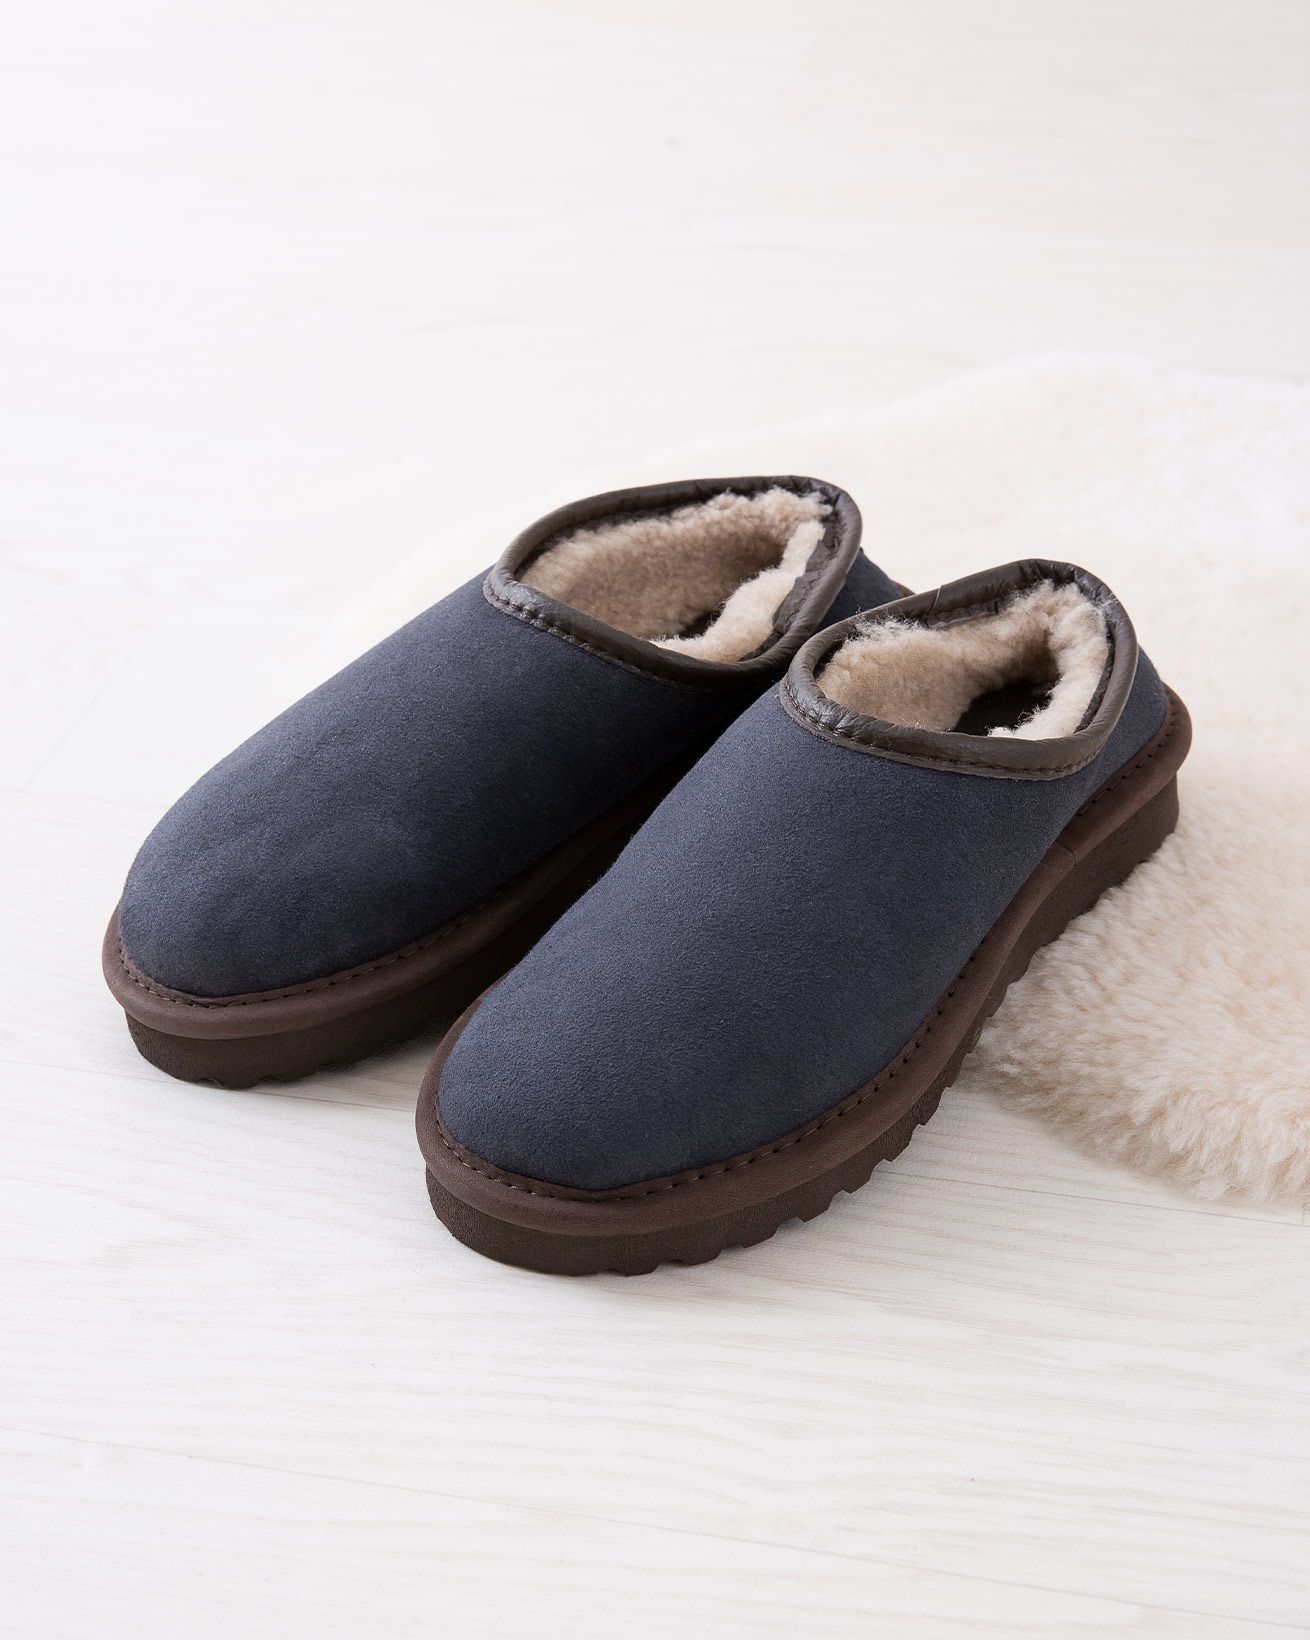 Women's Clogs (with backs)